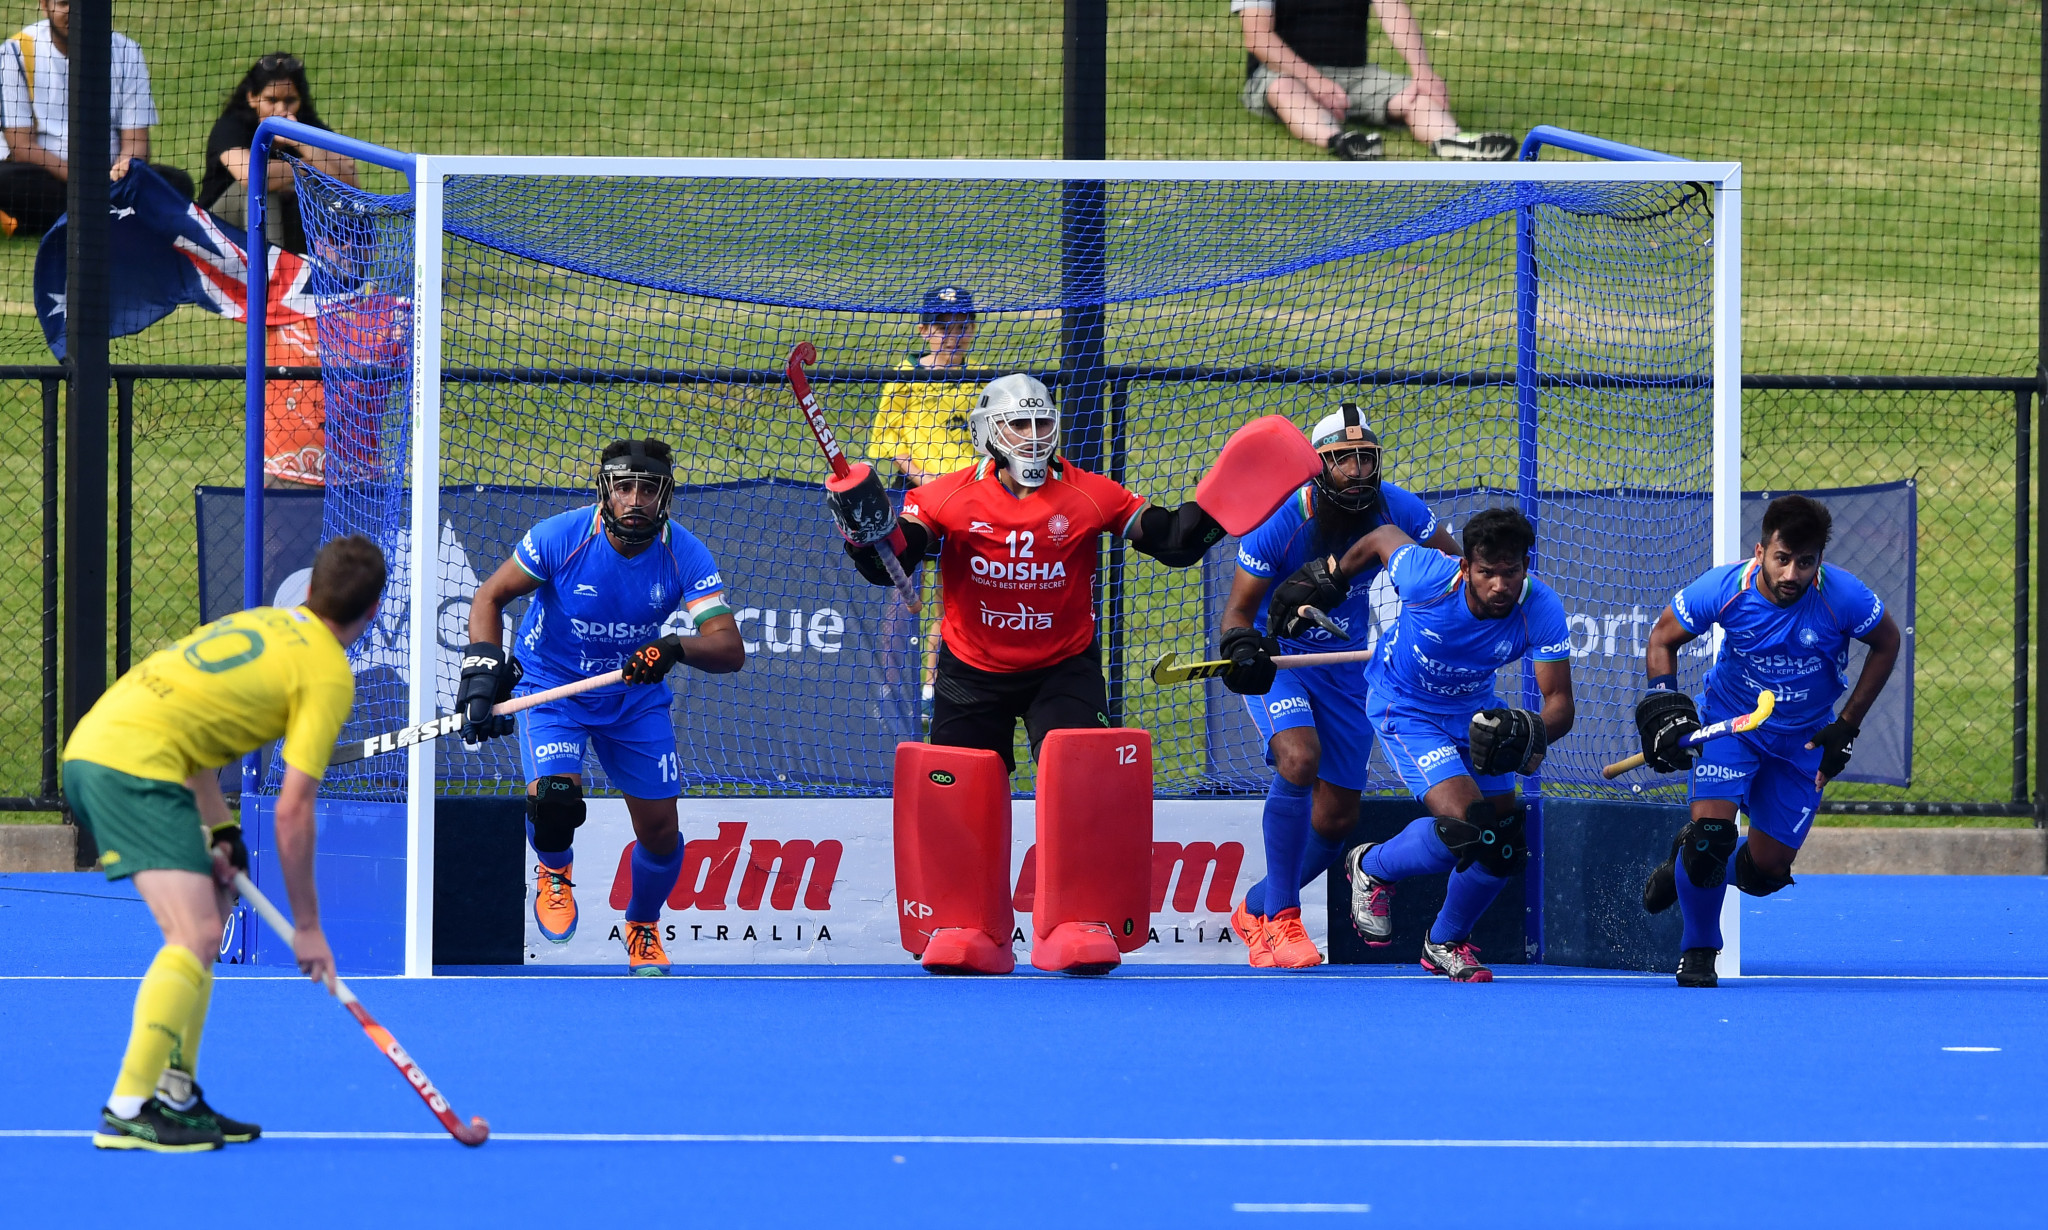 The FIH had planned to trial a new rule for hockey penalty corners, designed to eliminate the need for defenders to run at an attacker preparing to shoot at goal, but this has been put on hold ©Getty Images 